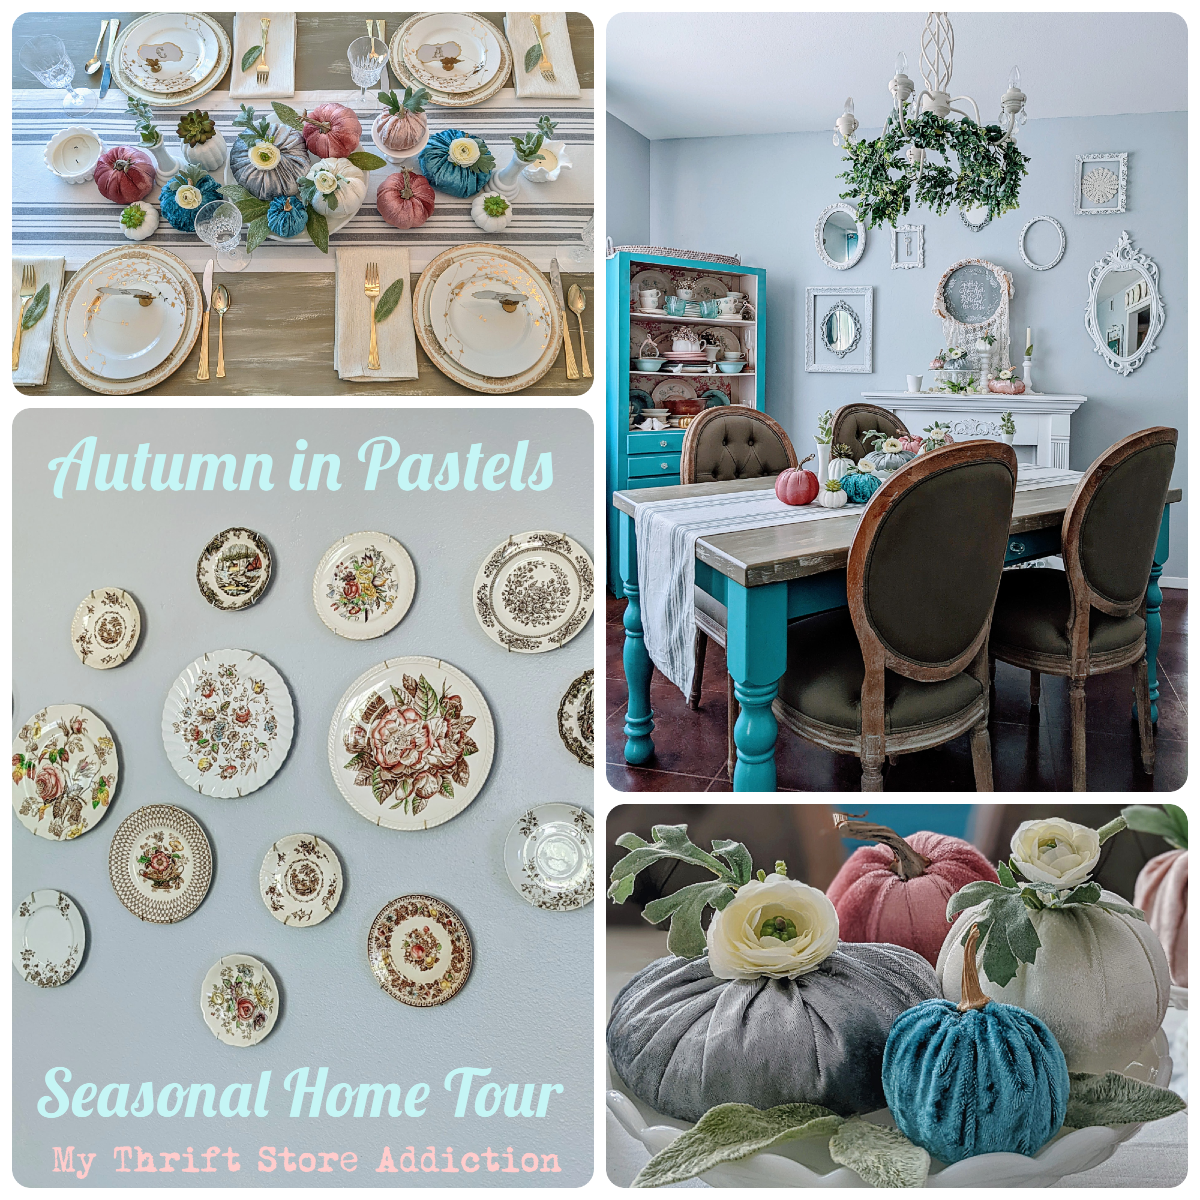 Autumn in pastels home tour